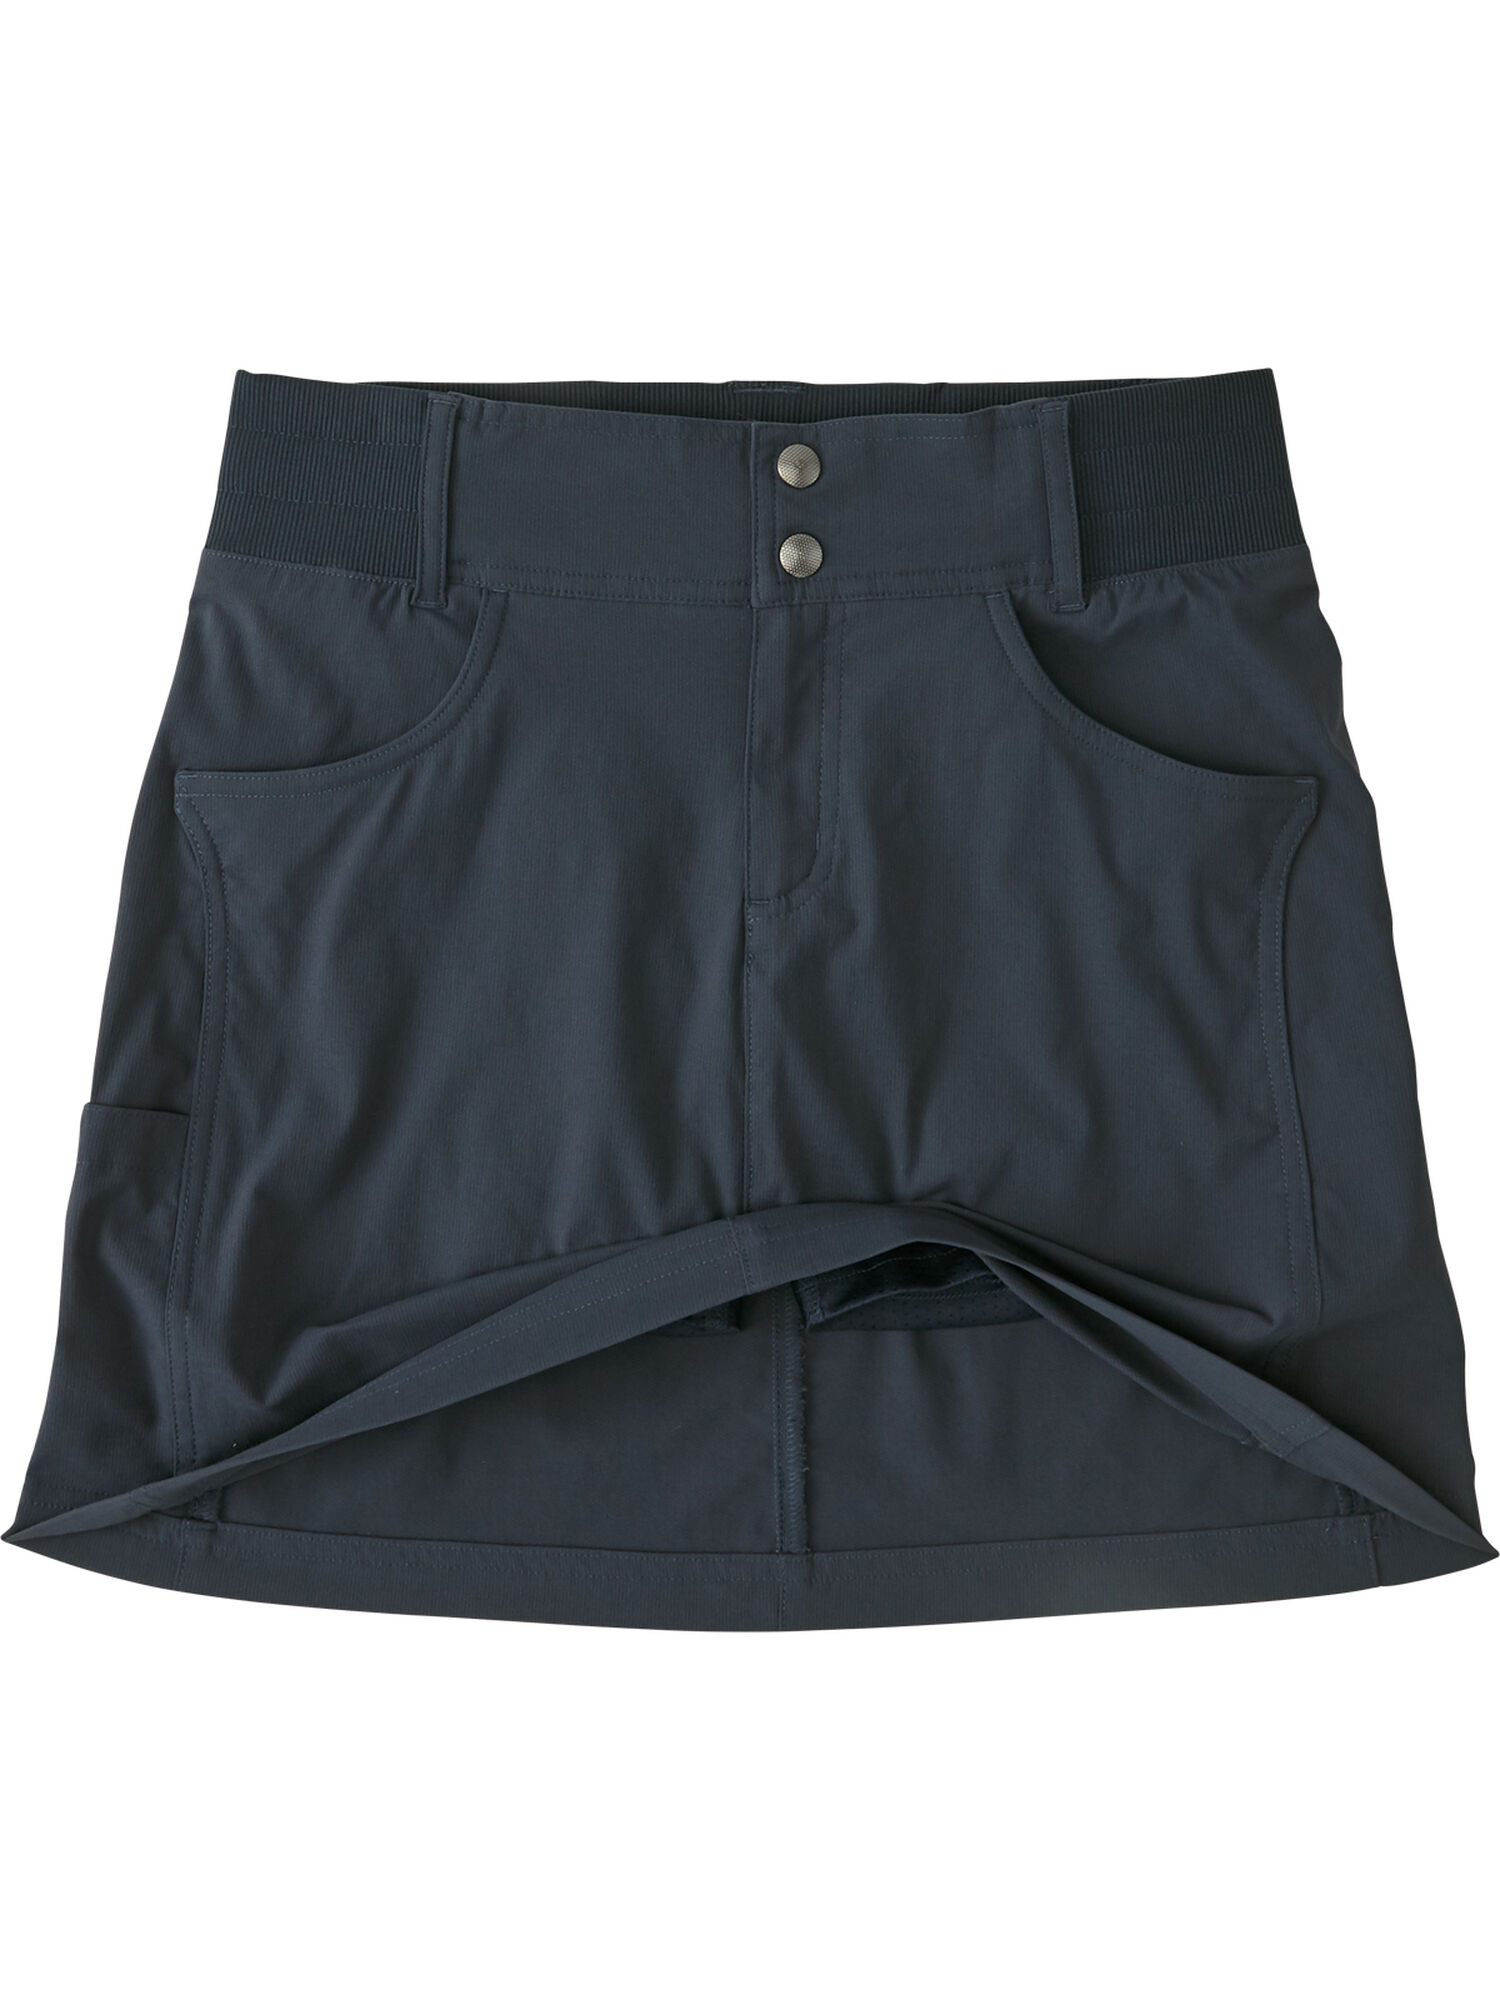 Hiking Skort with Pockets: Clamber Recycled